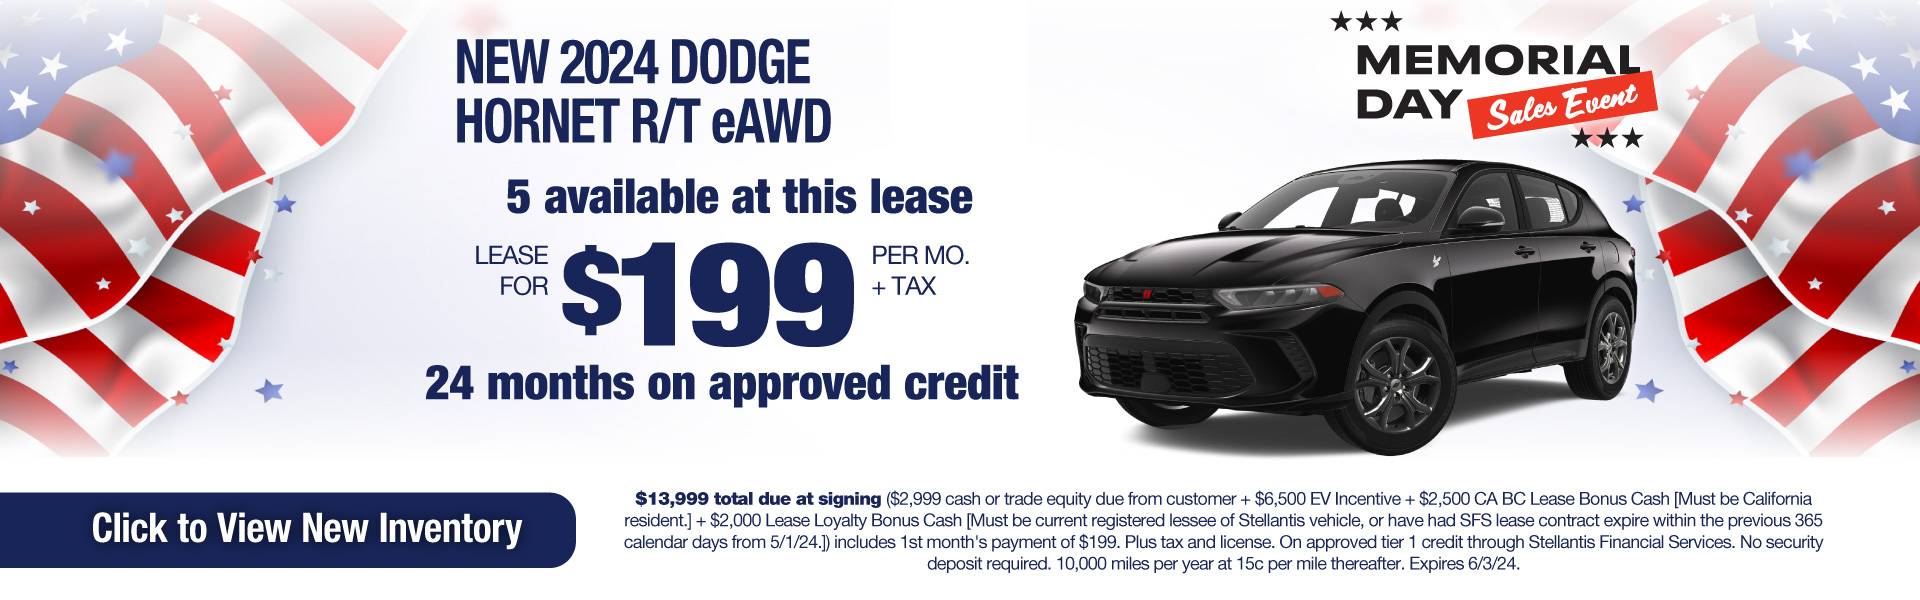 Lease a New 2024 Dodge Hornet R/T eAWD for $199 per month plus tax! Expires 6/3/24.